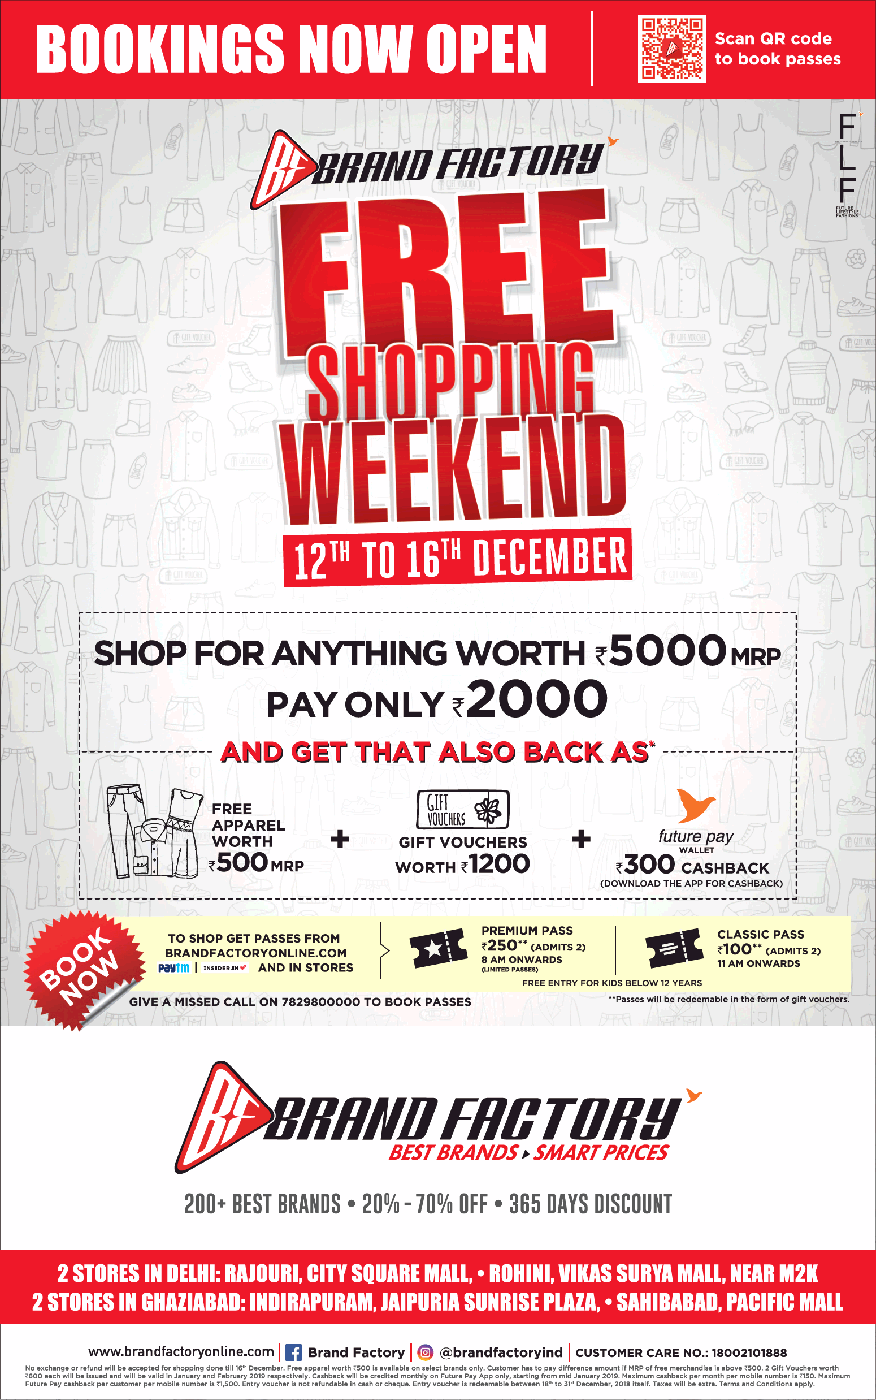 brand-factory-free-shopping-weekend-ad-delhi-times-09-12-2018.png